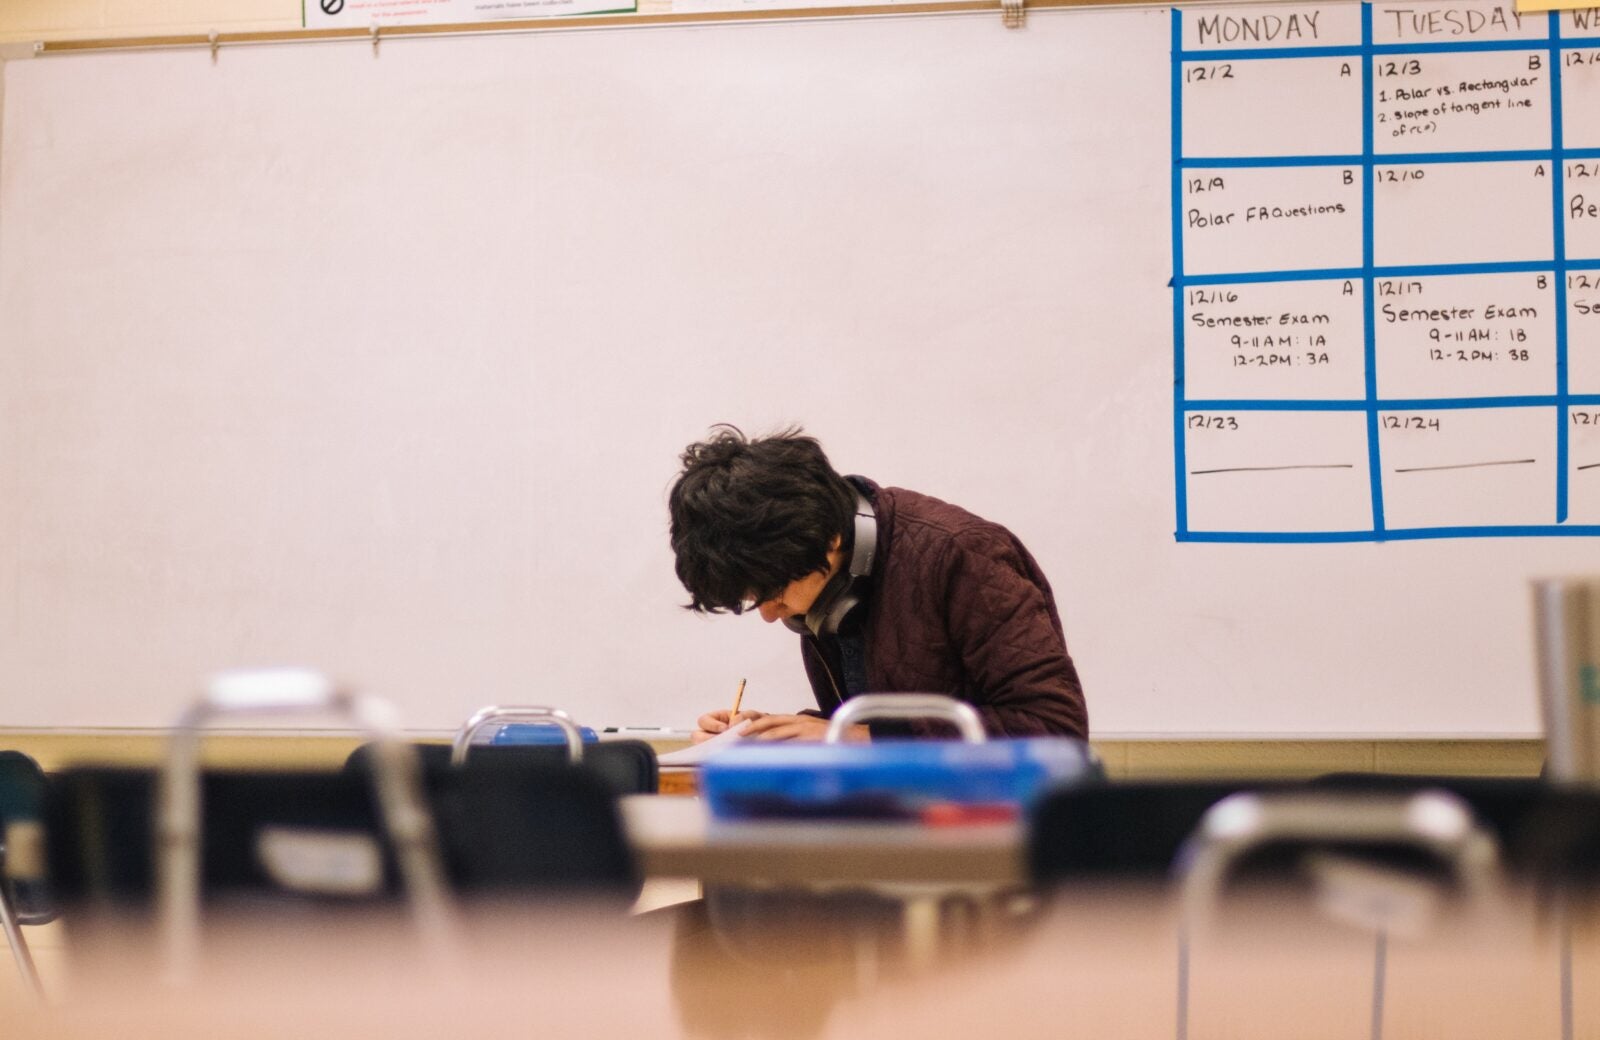 Young man wearing a brown sweater and resting his headphones on his neck sits alone in a classroom while looking down and writing on a notebook. 